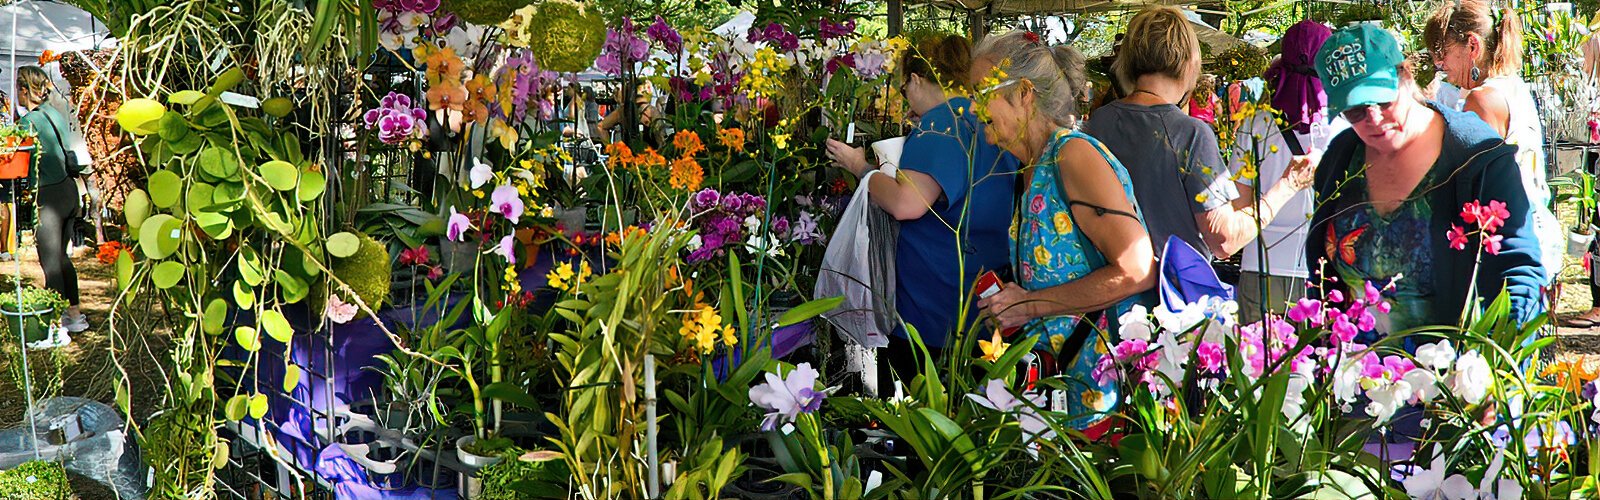 The Green Thumb Festival offers a great diversity of local plants and flowers to beautify the home.